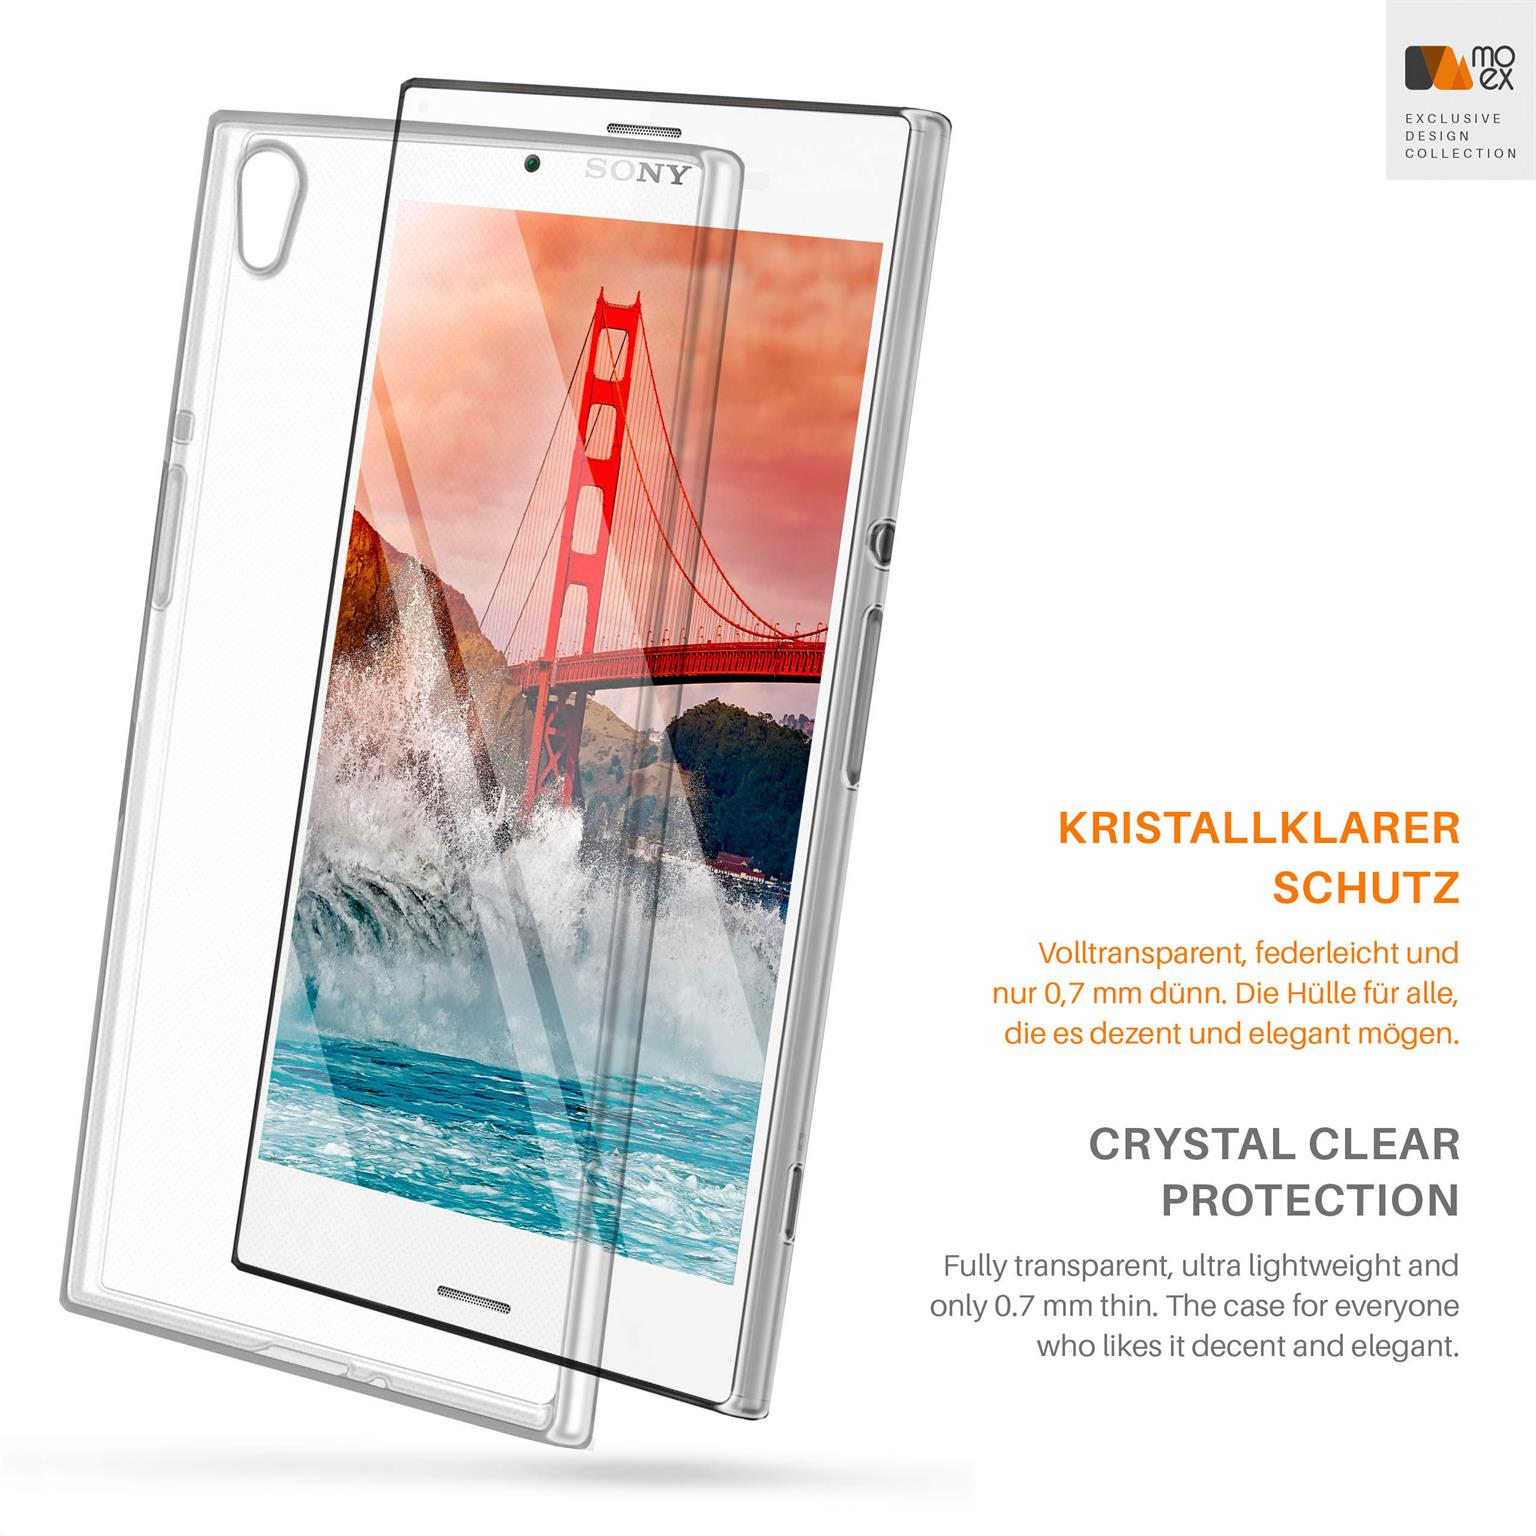 MOEX Aero Case, Backcover, Sony, Xperia Plus, Crystal-Clear Z3